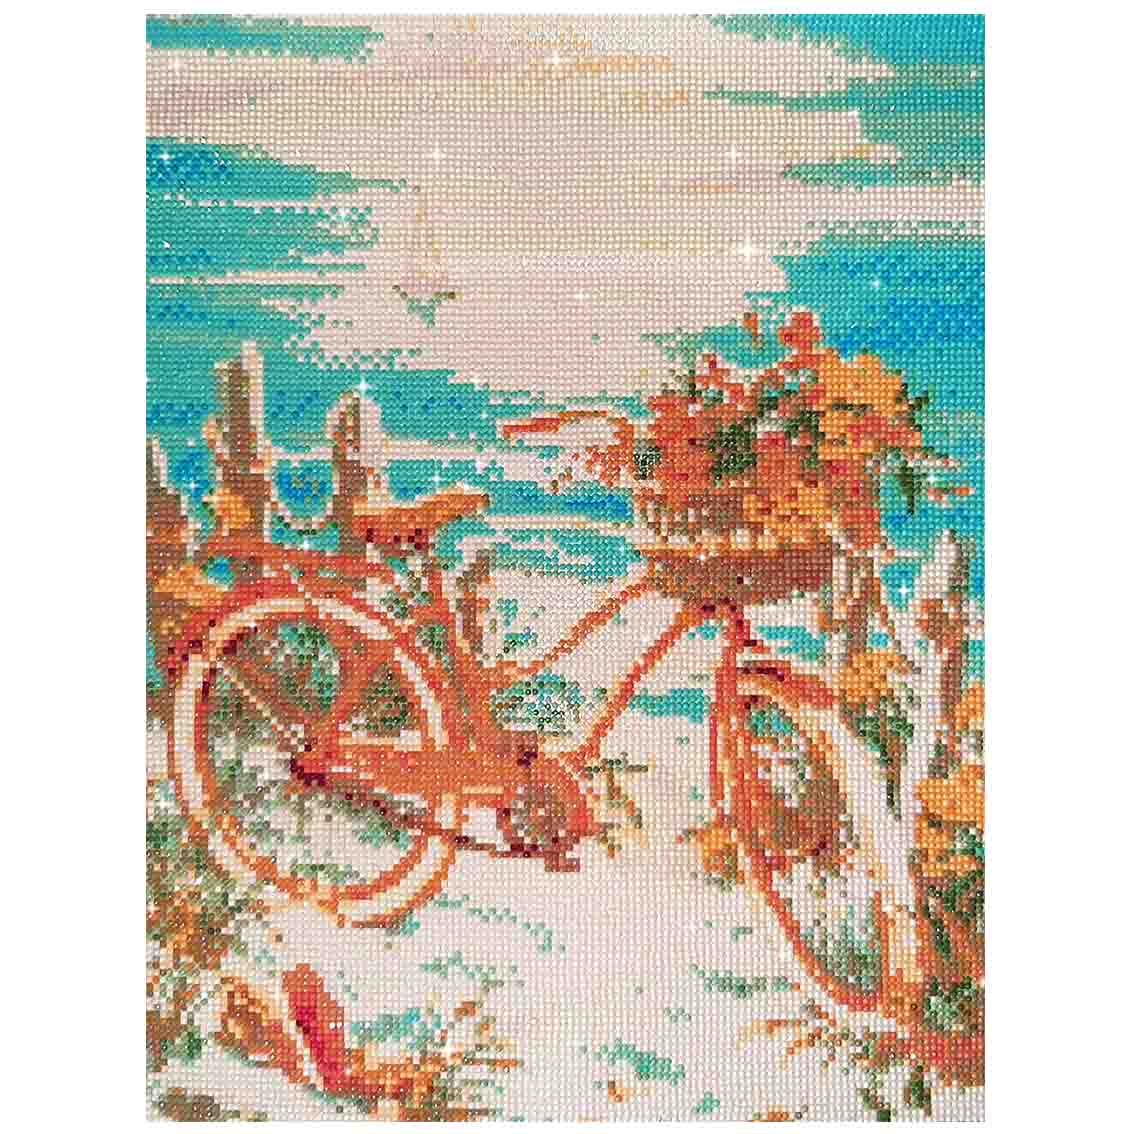 FINISHED DESIGN! BICYCLE BY THE OCEAN 40*50cm